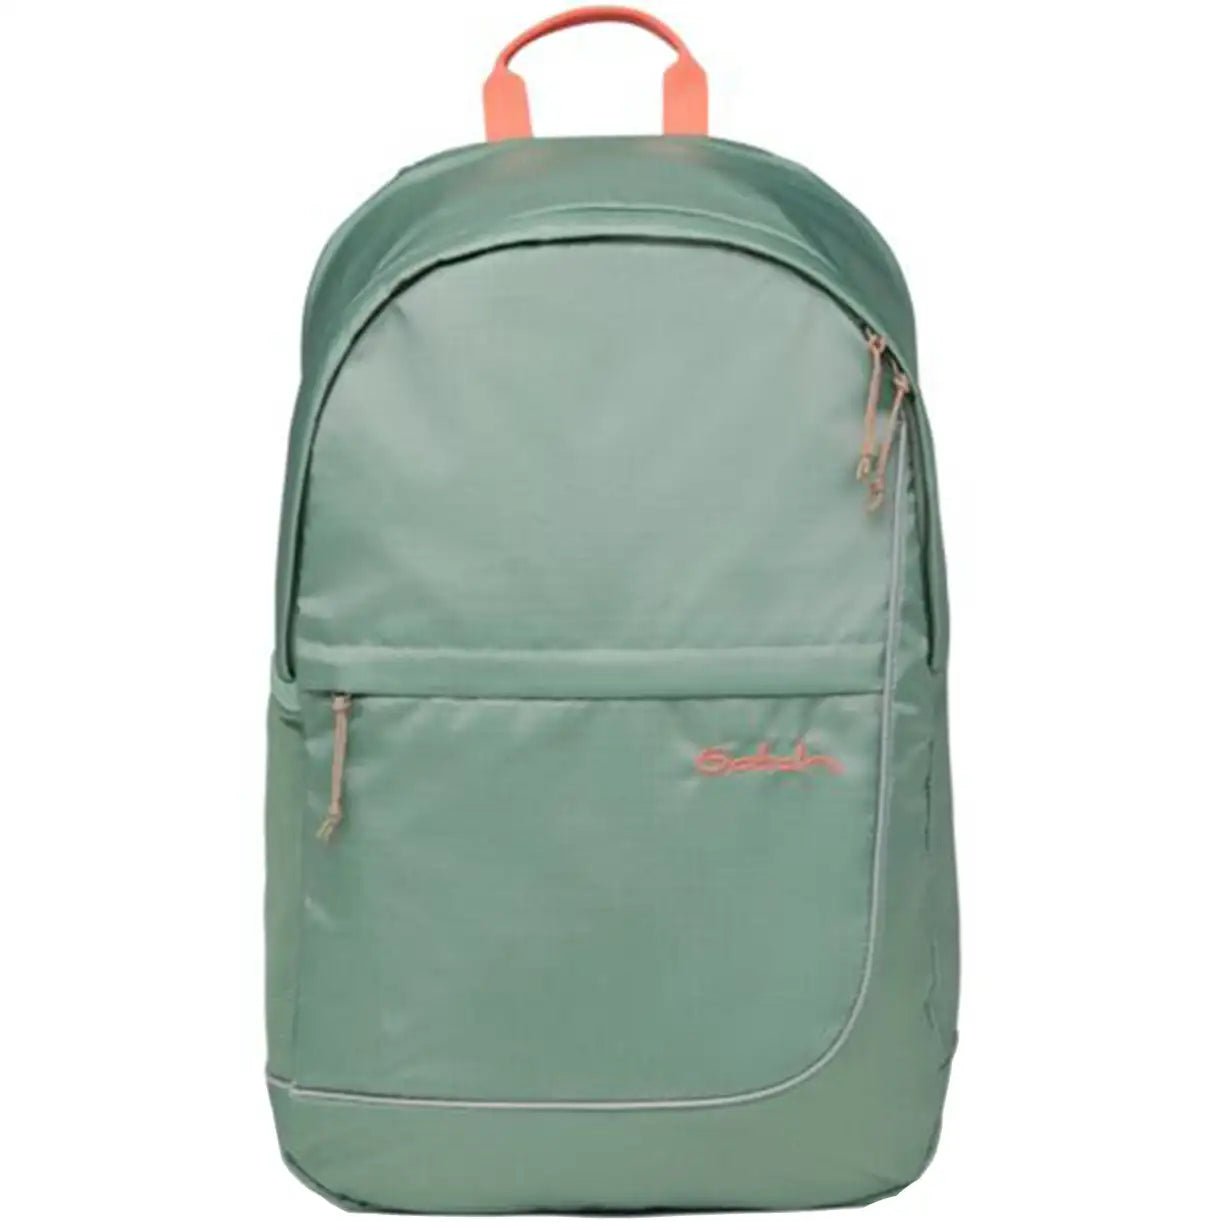 Satch Fly leisure backpack 45 cm - Ripstop Green